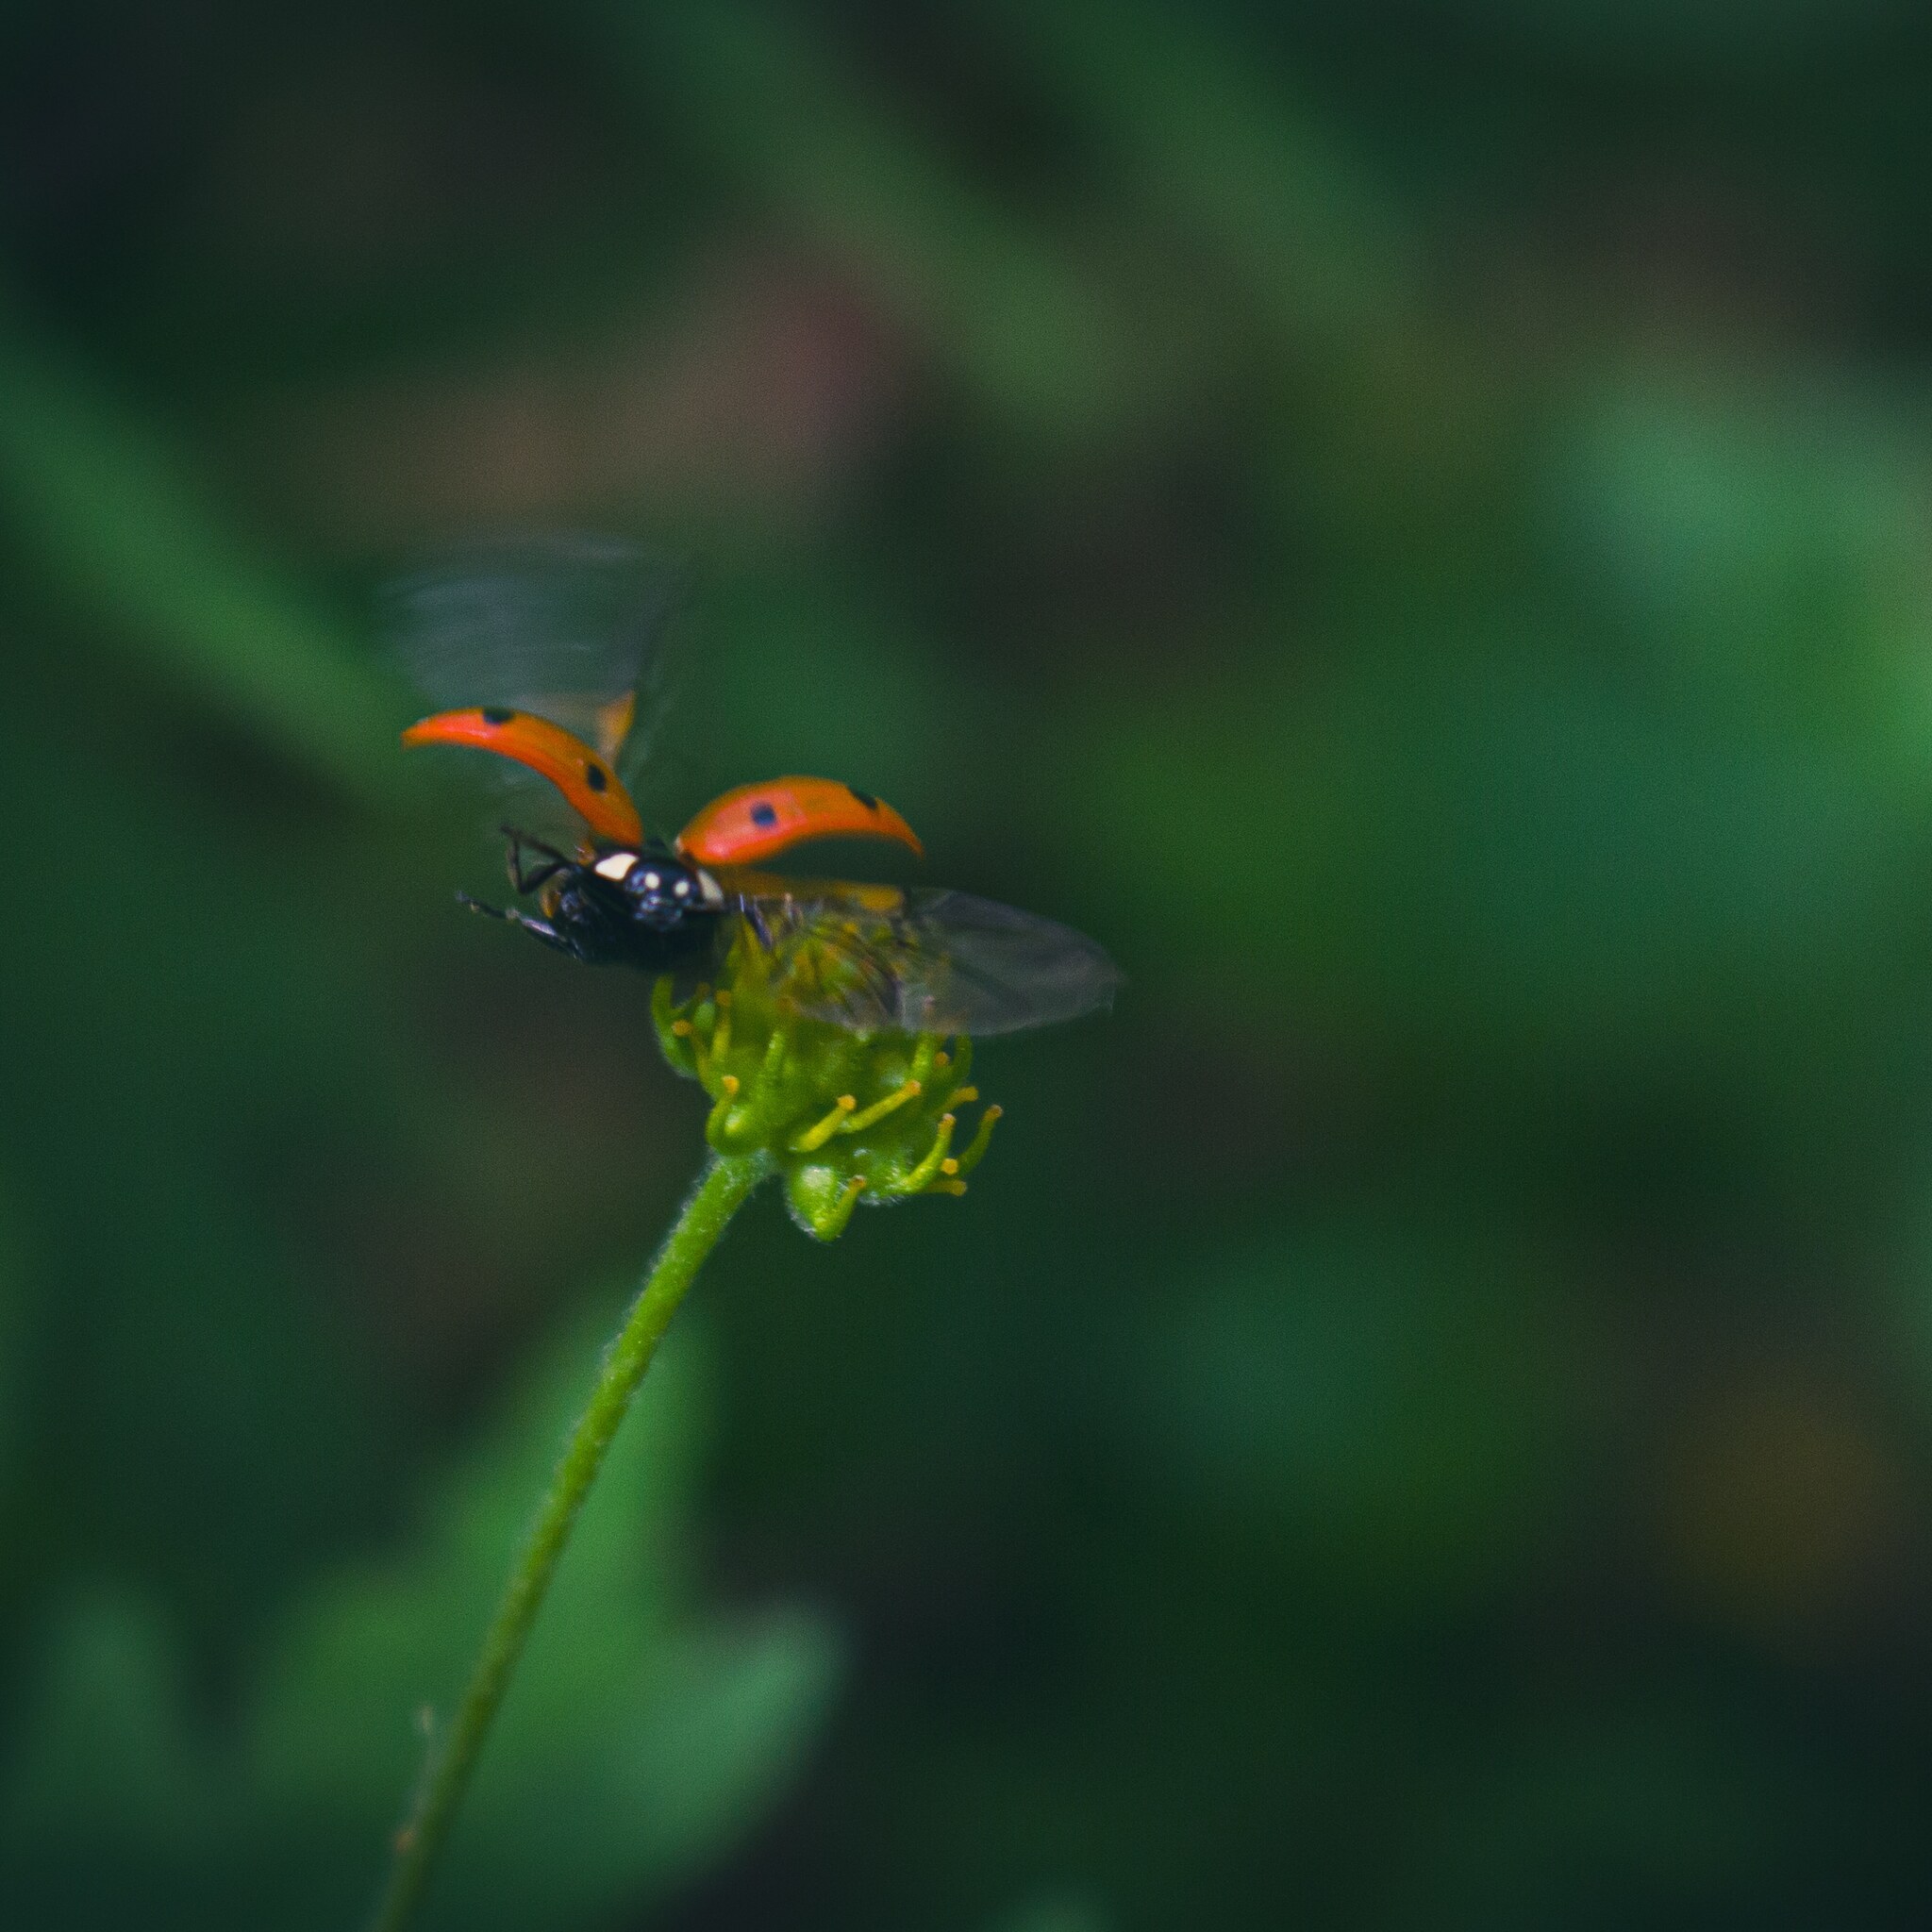 Taking off - My, Nature, ladybug, Insects, The photo, Lucky moment, wildlife